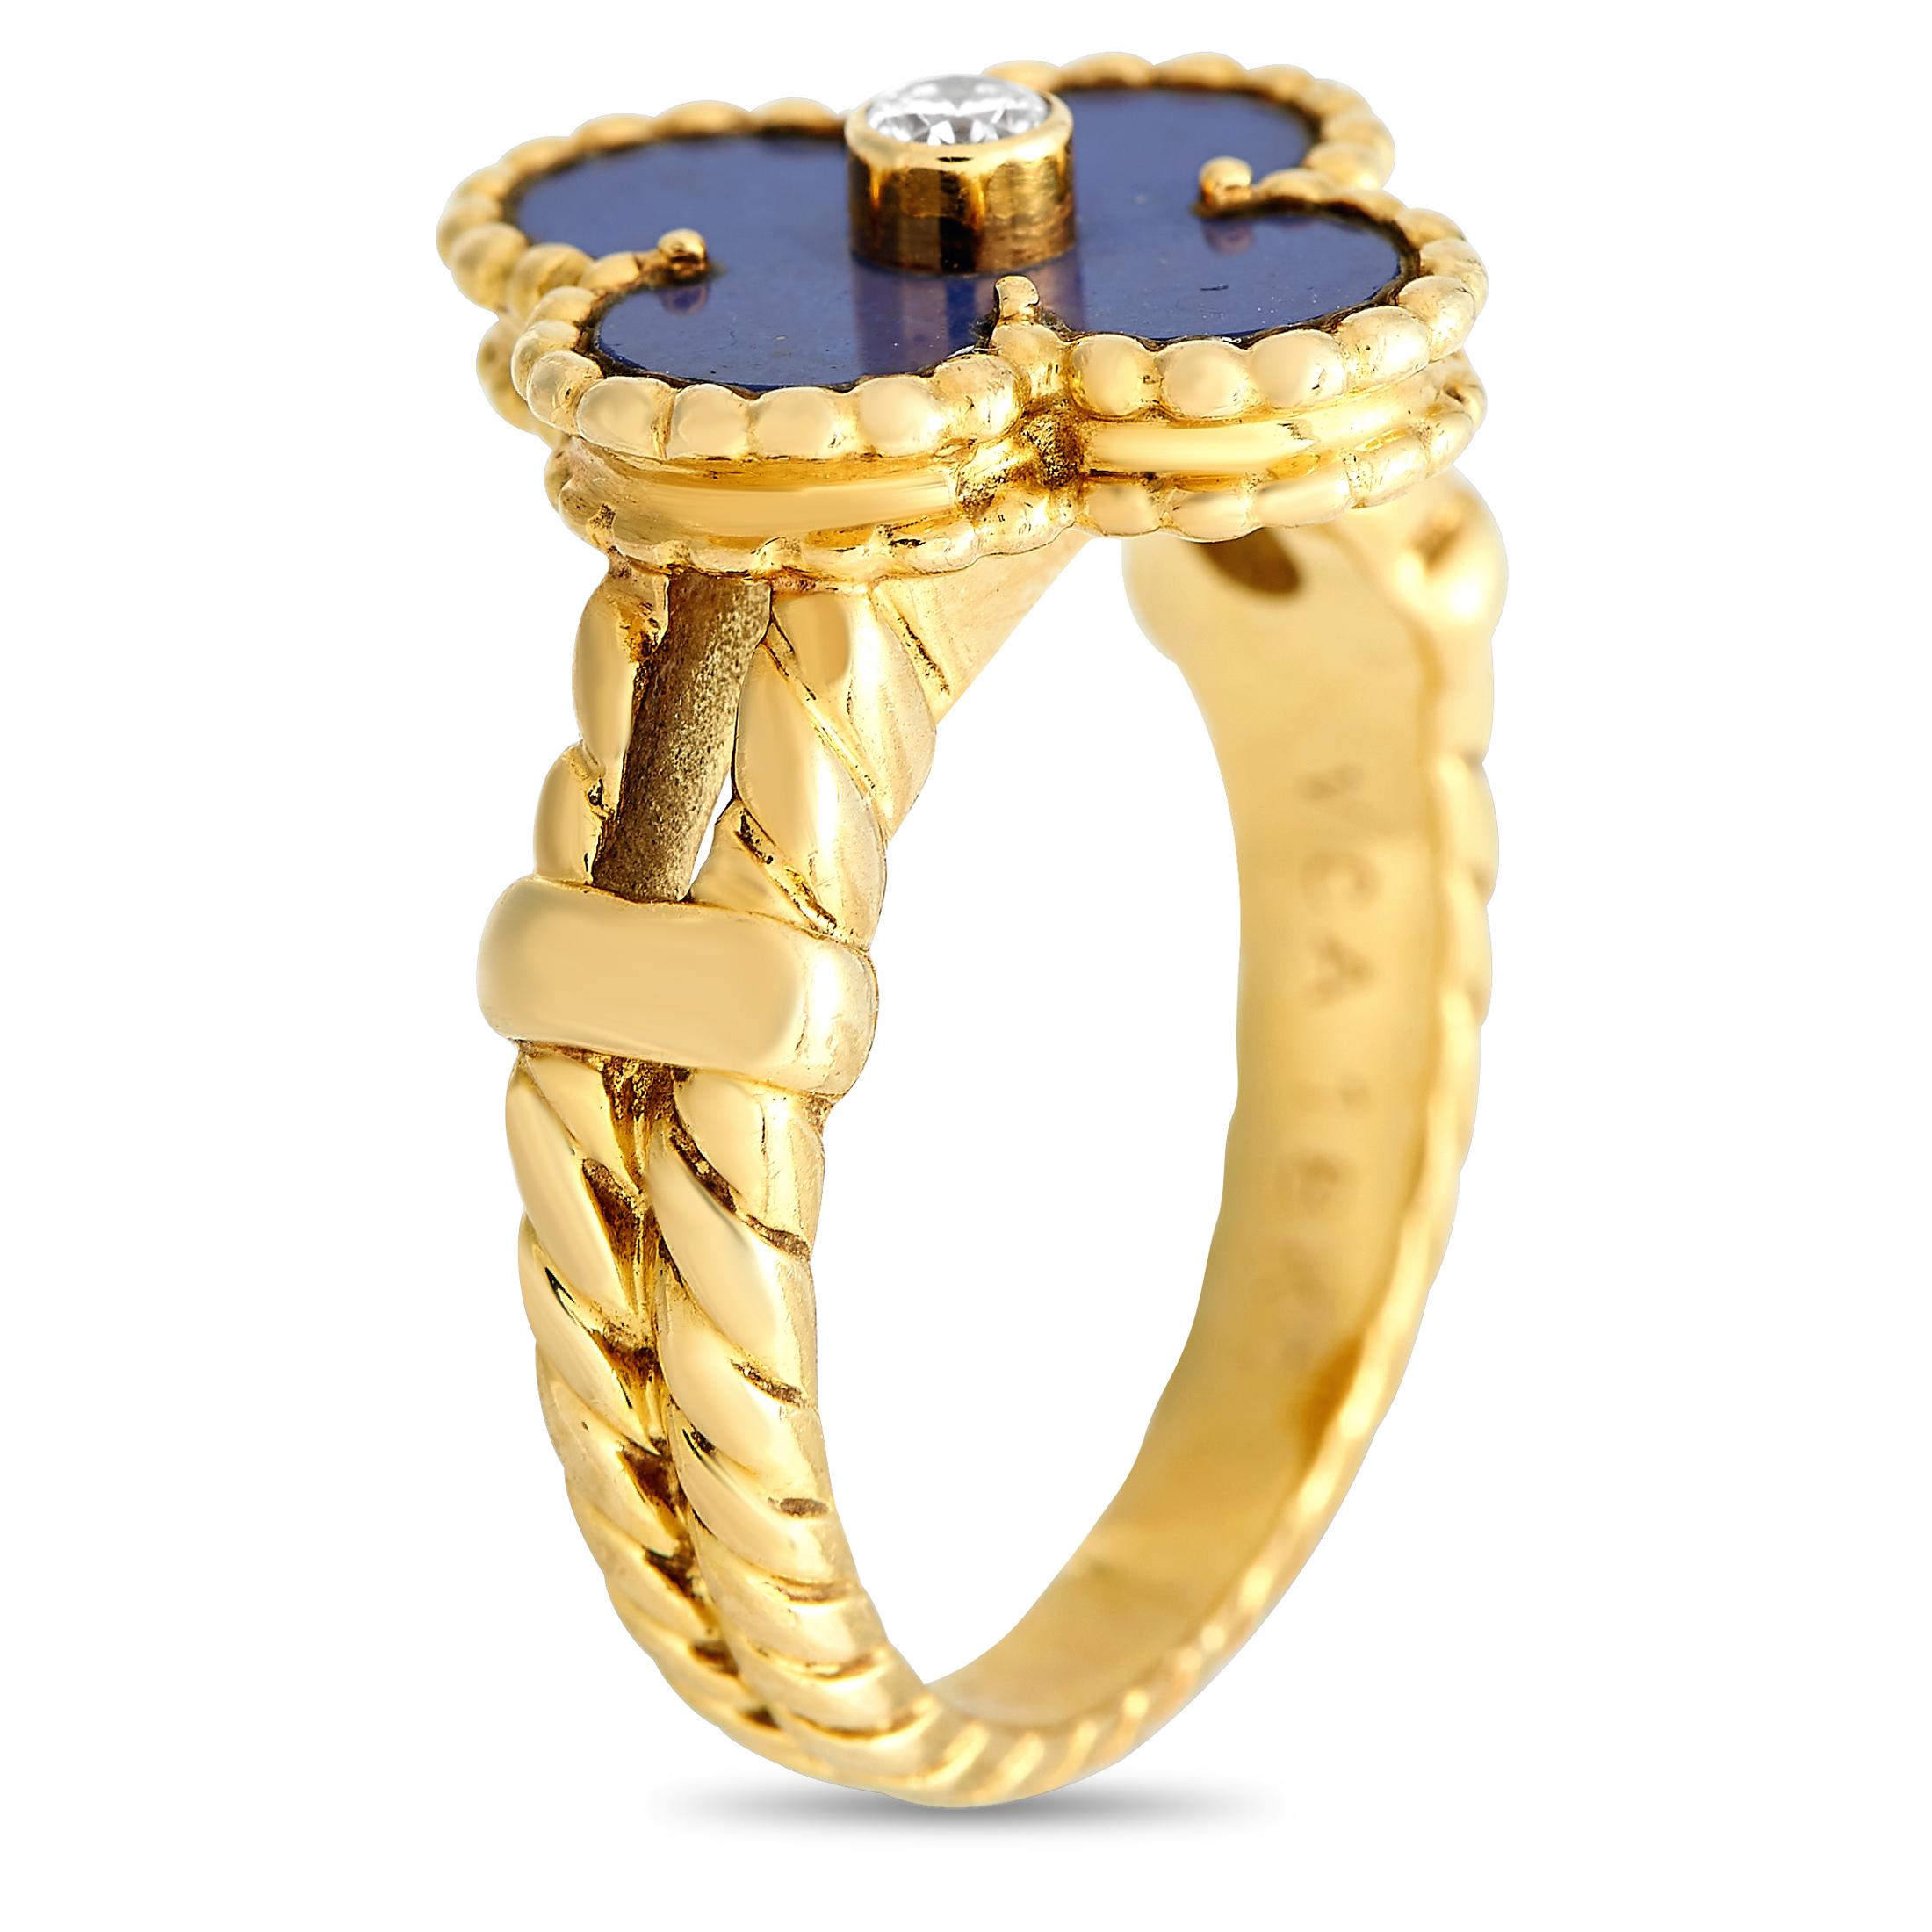 Looking for a subtle yet stylish accessory to add color to your outfits? Then get this Van Cleef & Arpels diamond and lapis lazuli Alhambra ring. It is designed with a yellow gold band and an Alhambra motif centerpiece complete with beaded edges, a